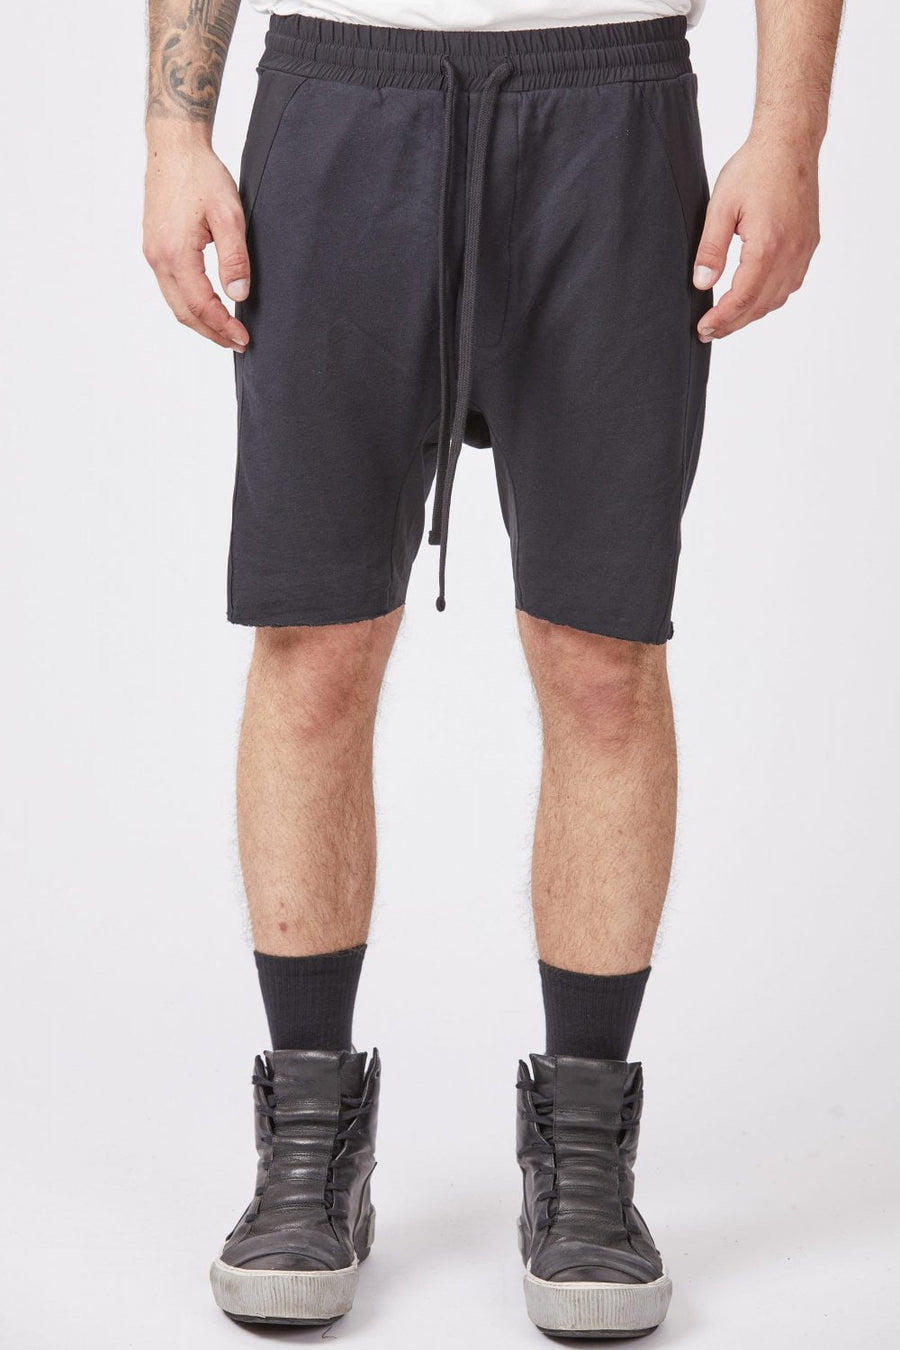 Buy the Thom Krom M ST 301 Shorts in Black at Intro. Spend £50 for free UK delivery. Official stockists. We ship worldwide.